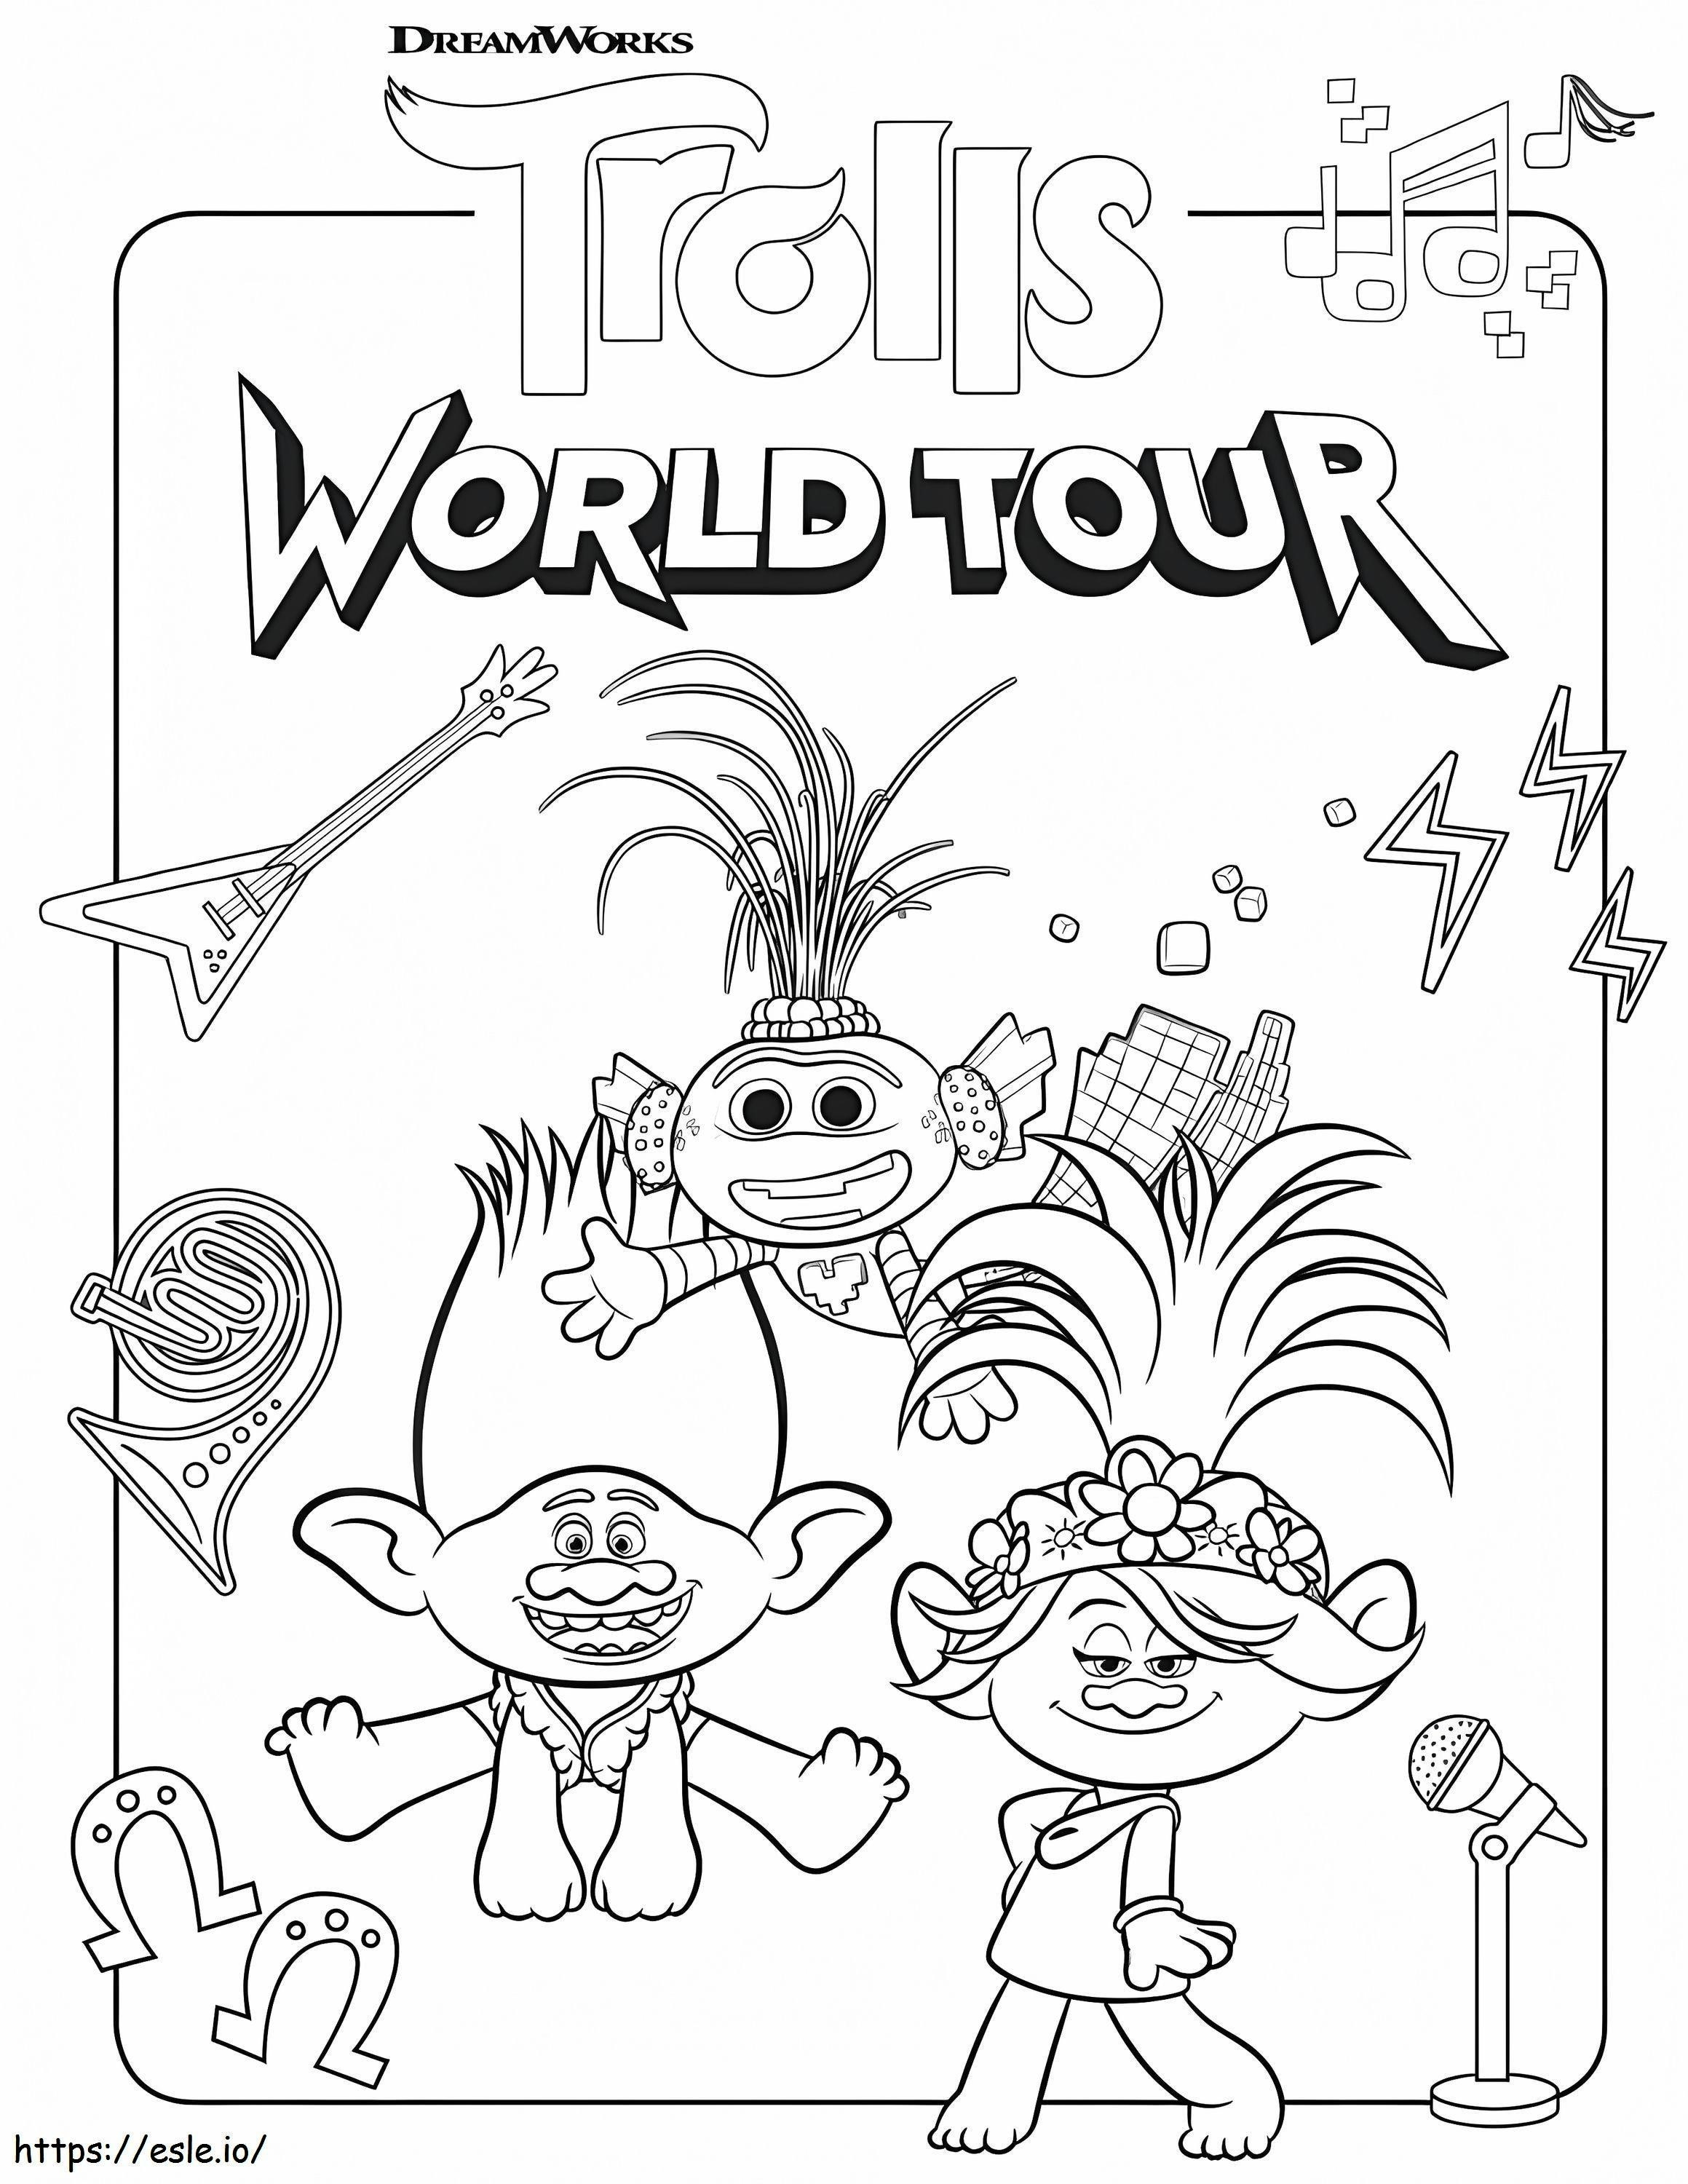 Trolls World Tour coloring page